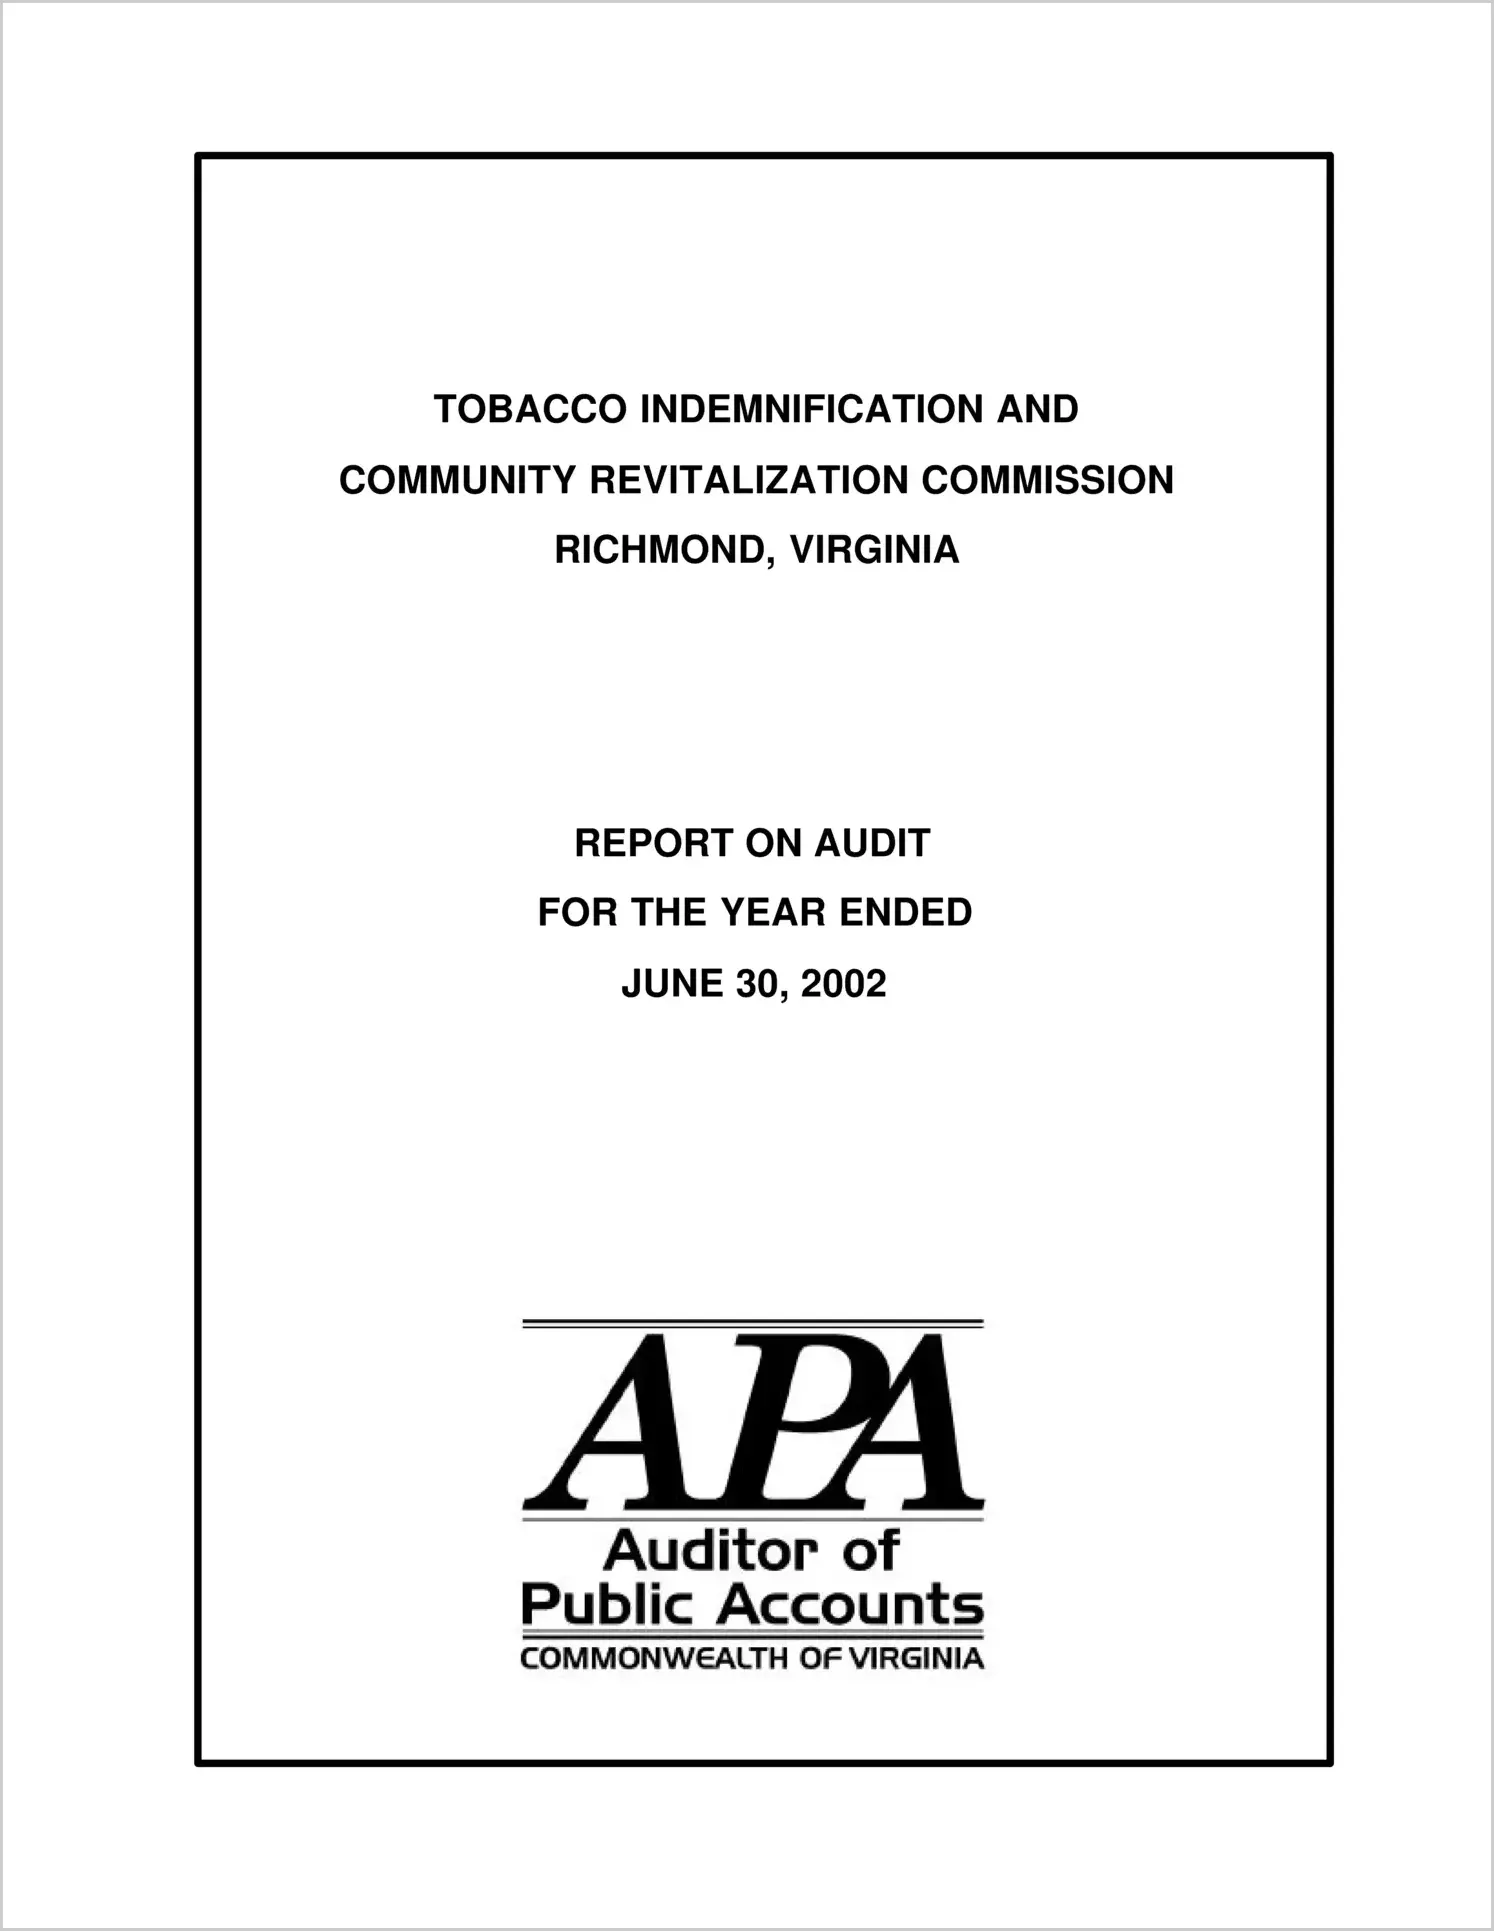 Tobacco Indemnification and Community Revitalization Commission for the year ended June 30, 2002